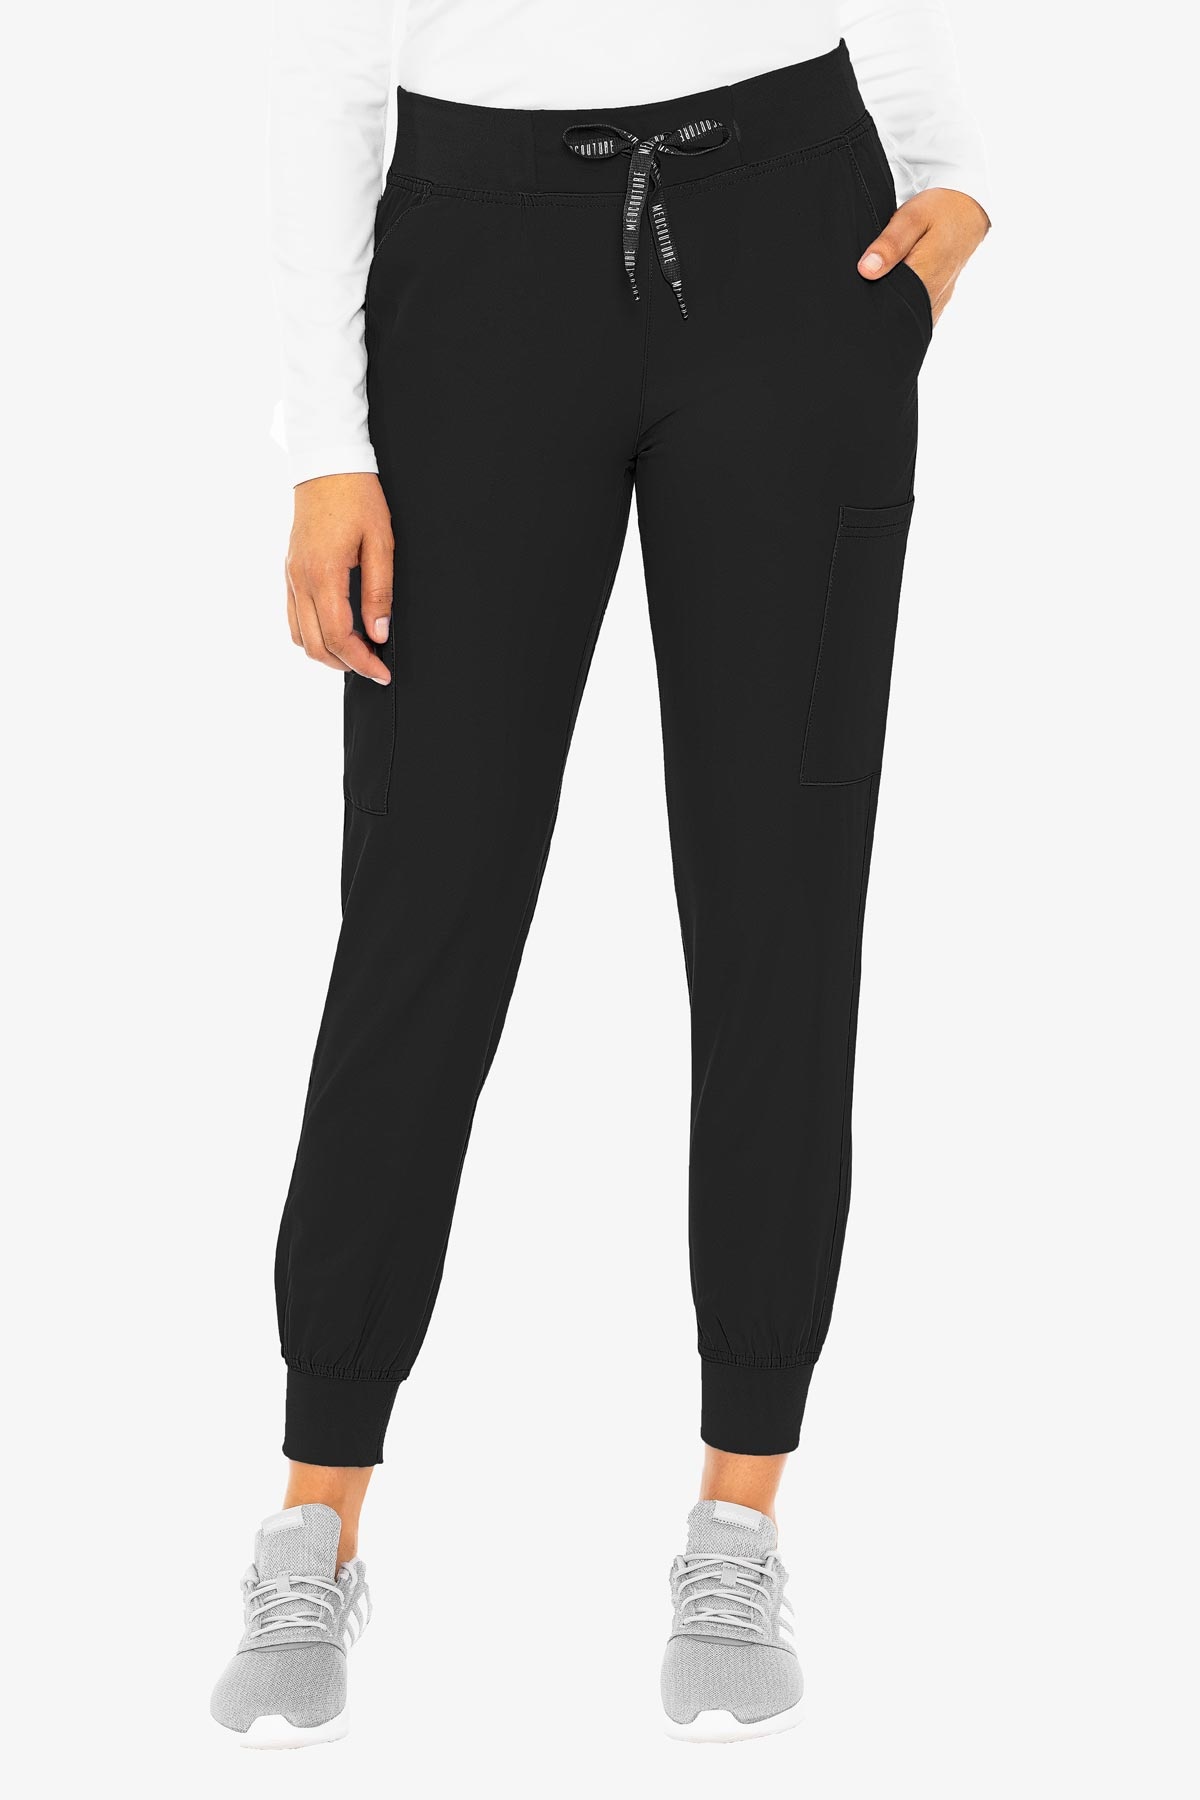 Med Couture Insight Women's Jogger Pant (Tall) - Just Scrubs